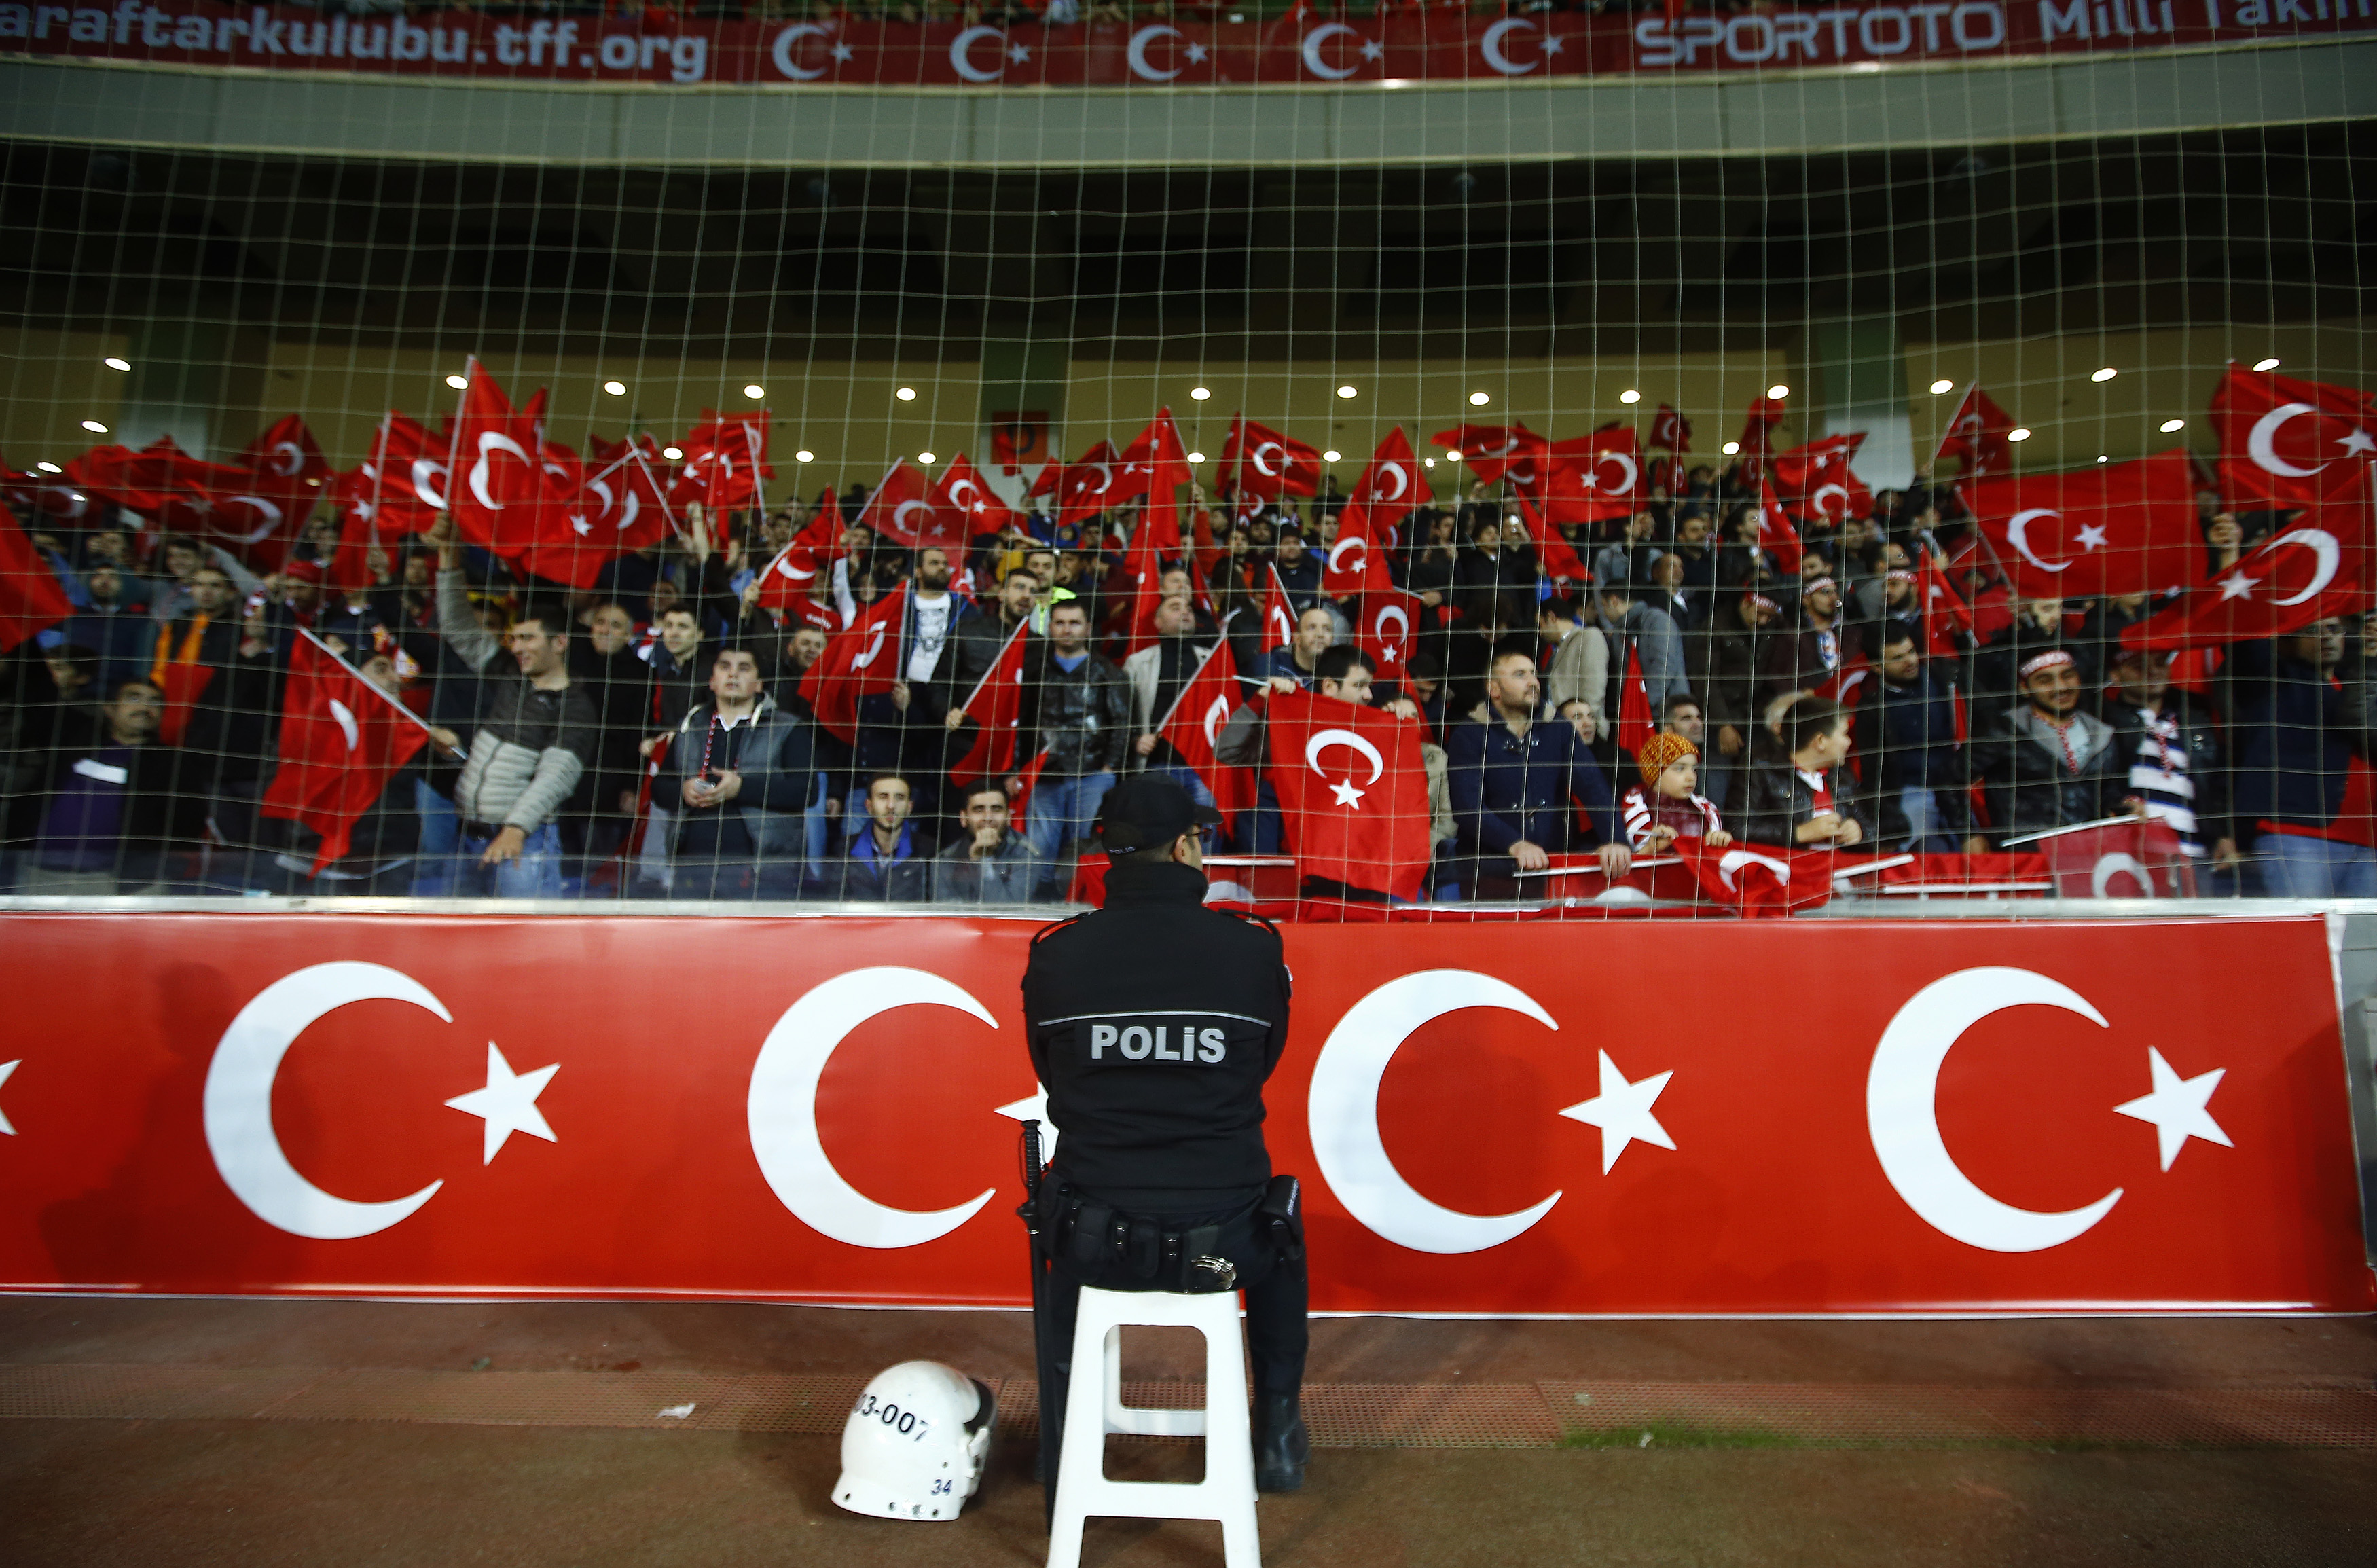 A policeman stands guard in front of supporters of Turkey during their international friendly soccer match against Greece at Basaksehir Fatih Terim Stadium in Istanbul on Nov. 17, 2015 (Osman Orsal—Reuters)